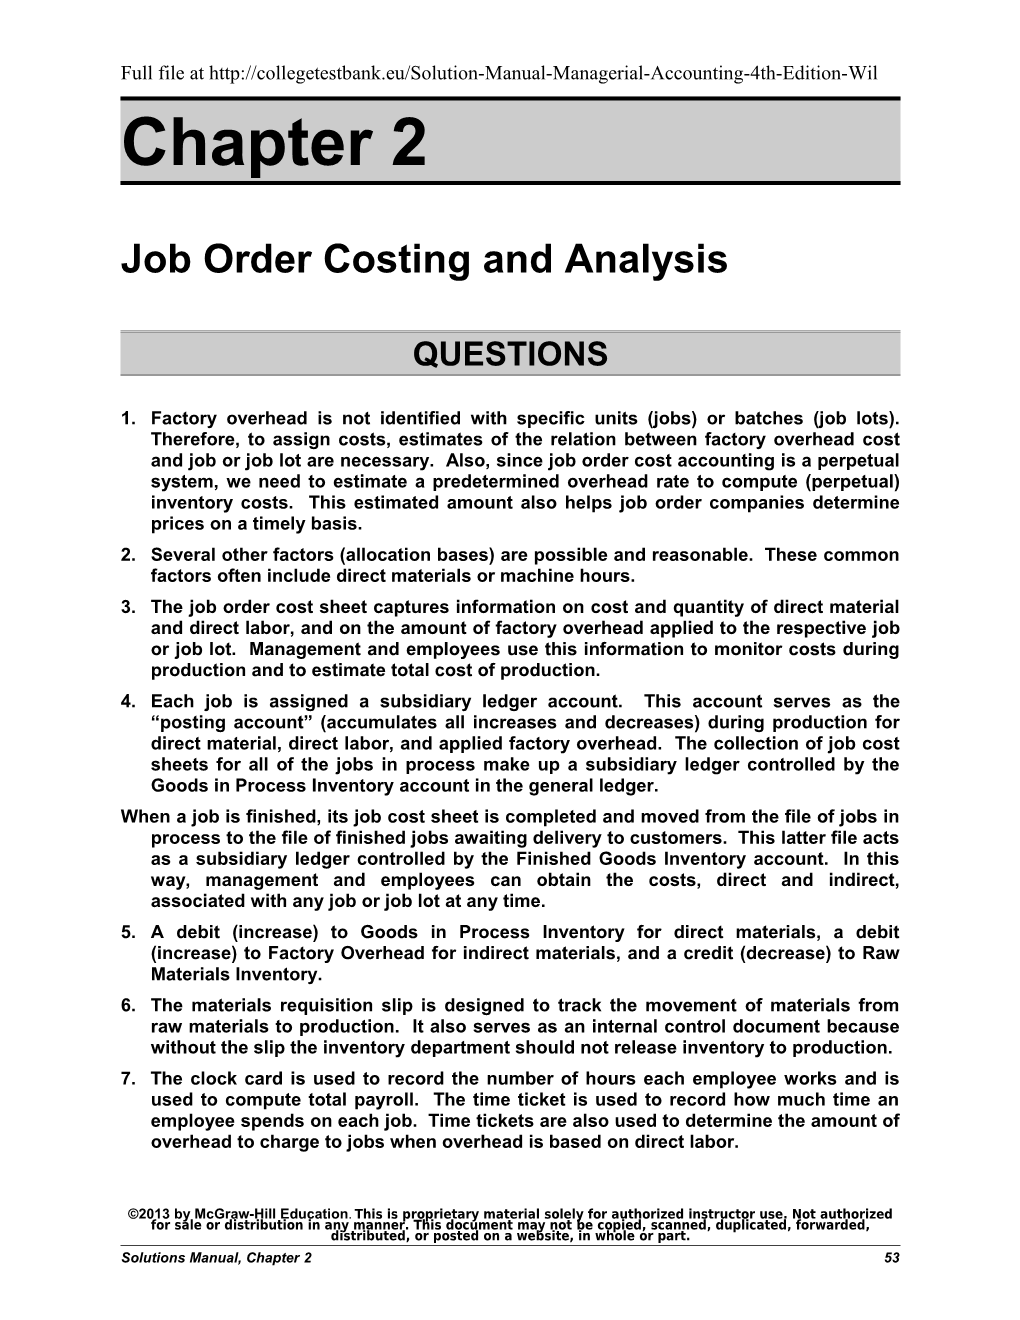 Job Order Costing and Analysis